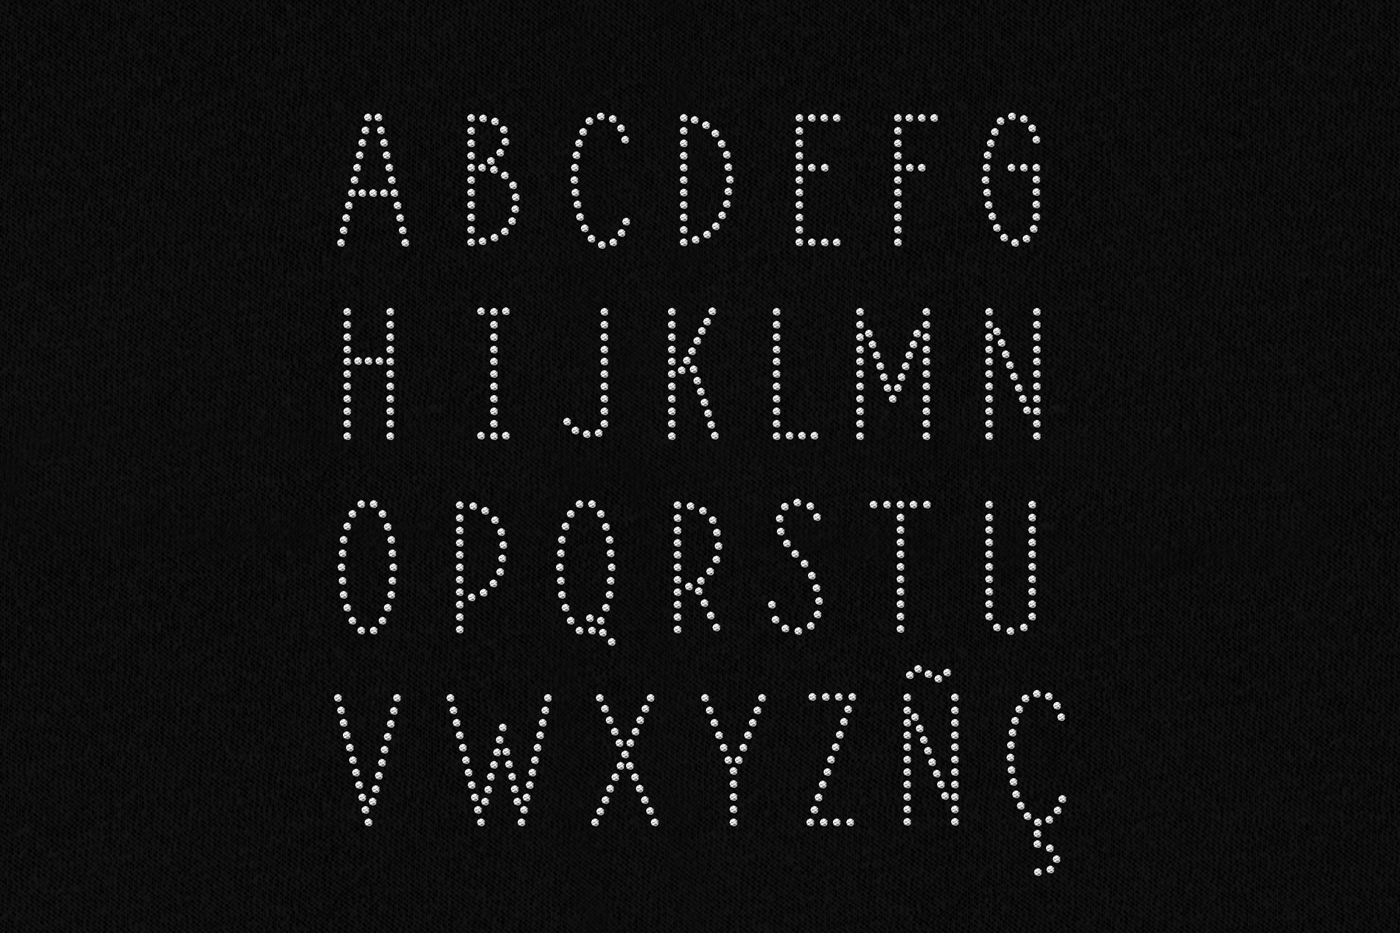 Art deco style alphabet made out of clear rhinestones on a black background.